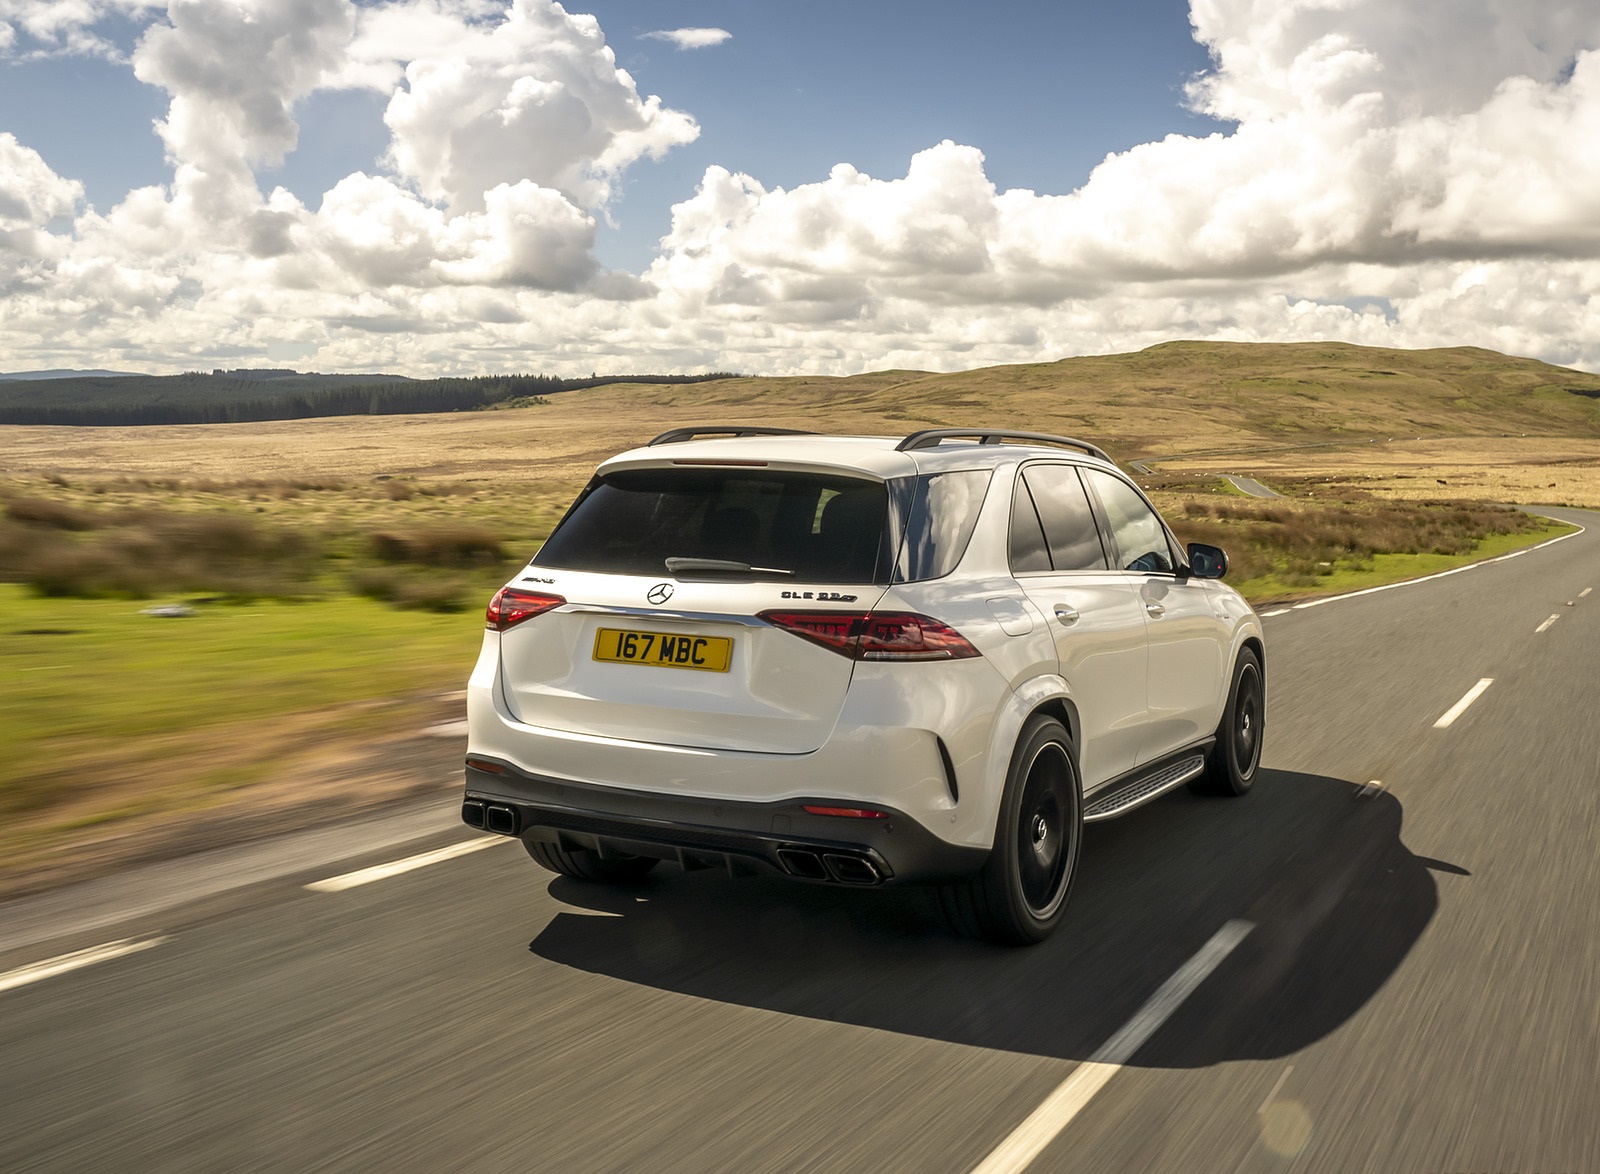 2021 Mercedes-AMG GLE 63 S 4MATIC (UK-Spec) Rear Three-Quarter Wallpapers #29 of 187